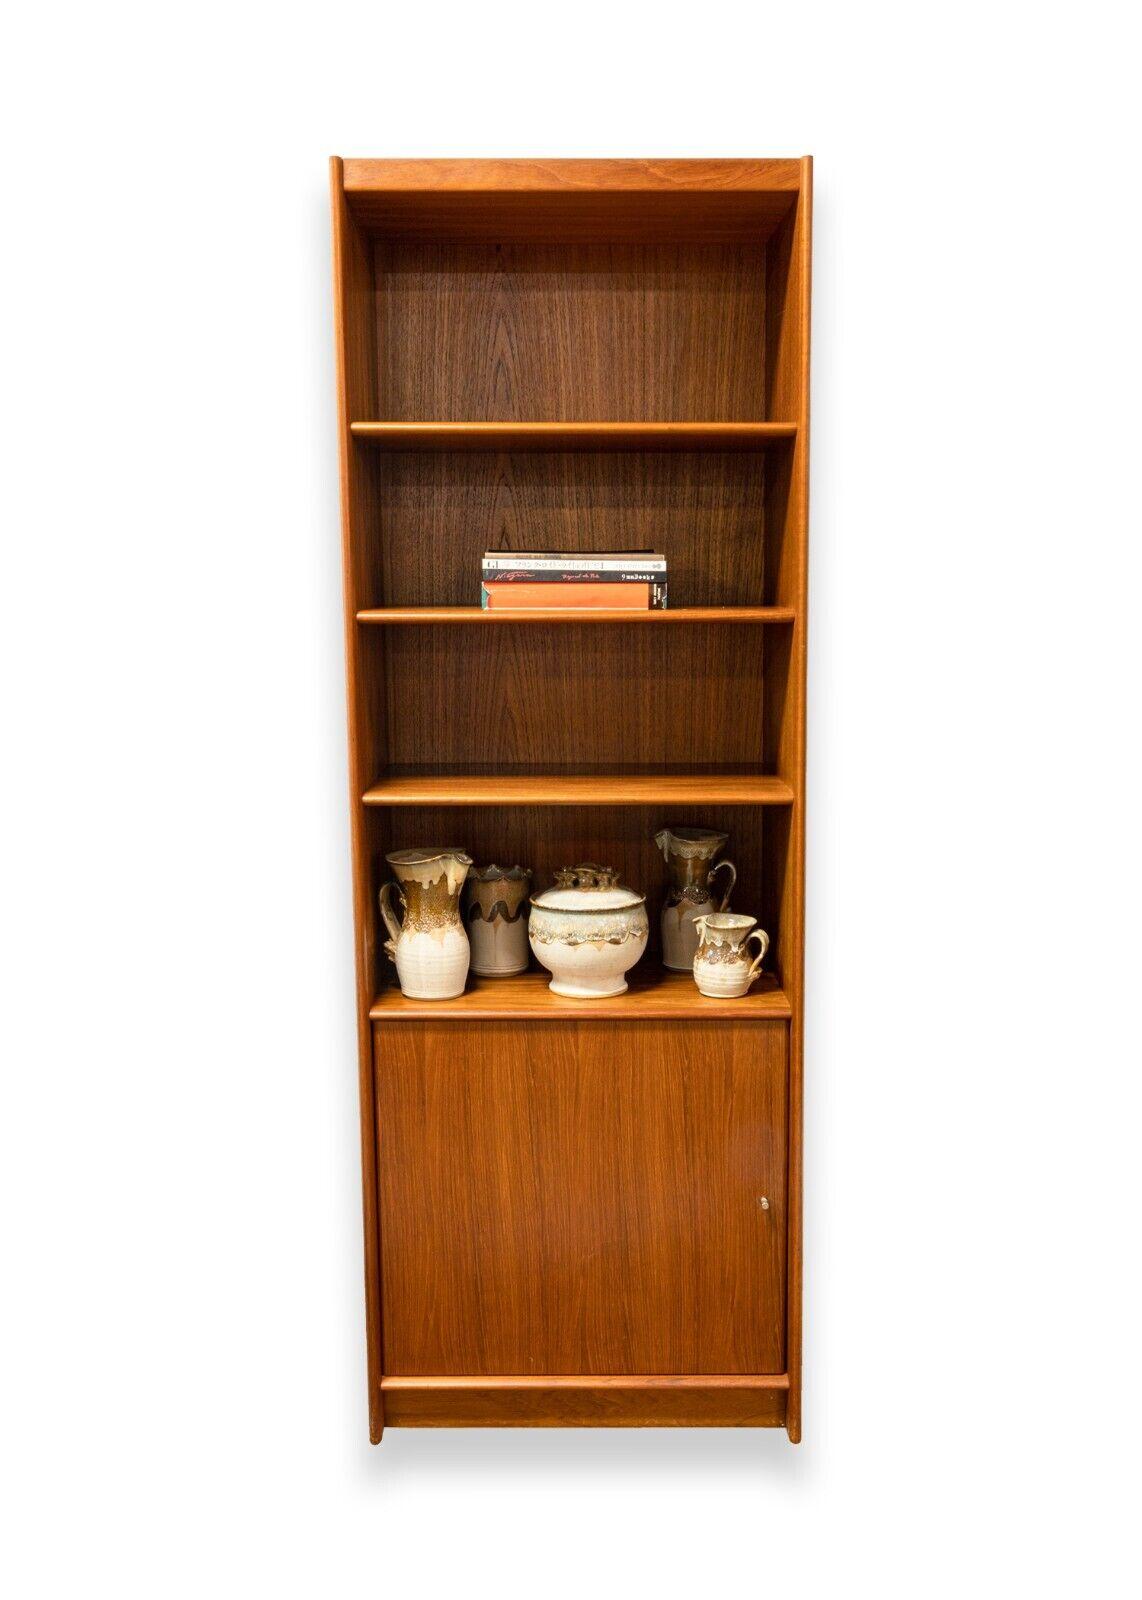 A mid century modern Danish teak wood bookshelf. A wonderful wooden bookcase featuring a lovely teak wood grain, 4 open shelves, and a door revealing two additional shelves. This piece is in very good condition. The back is unfinished, and is marked